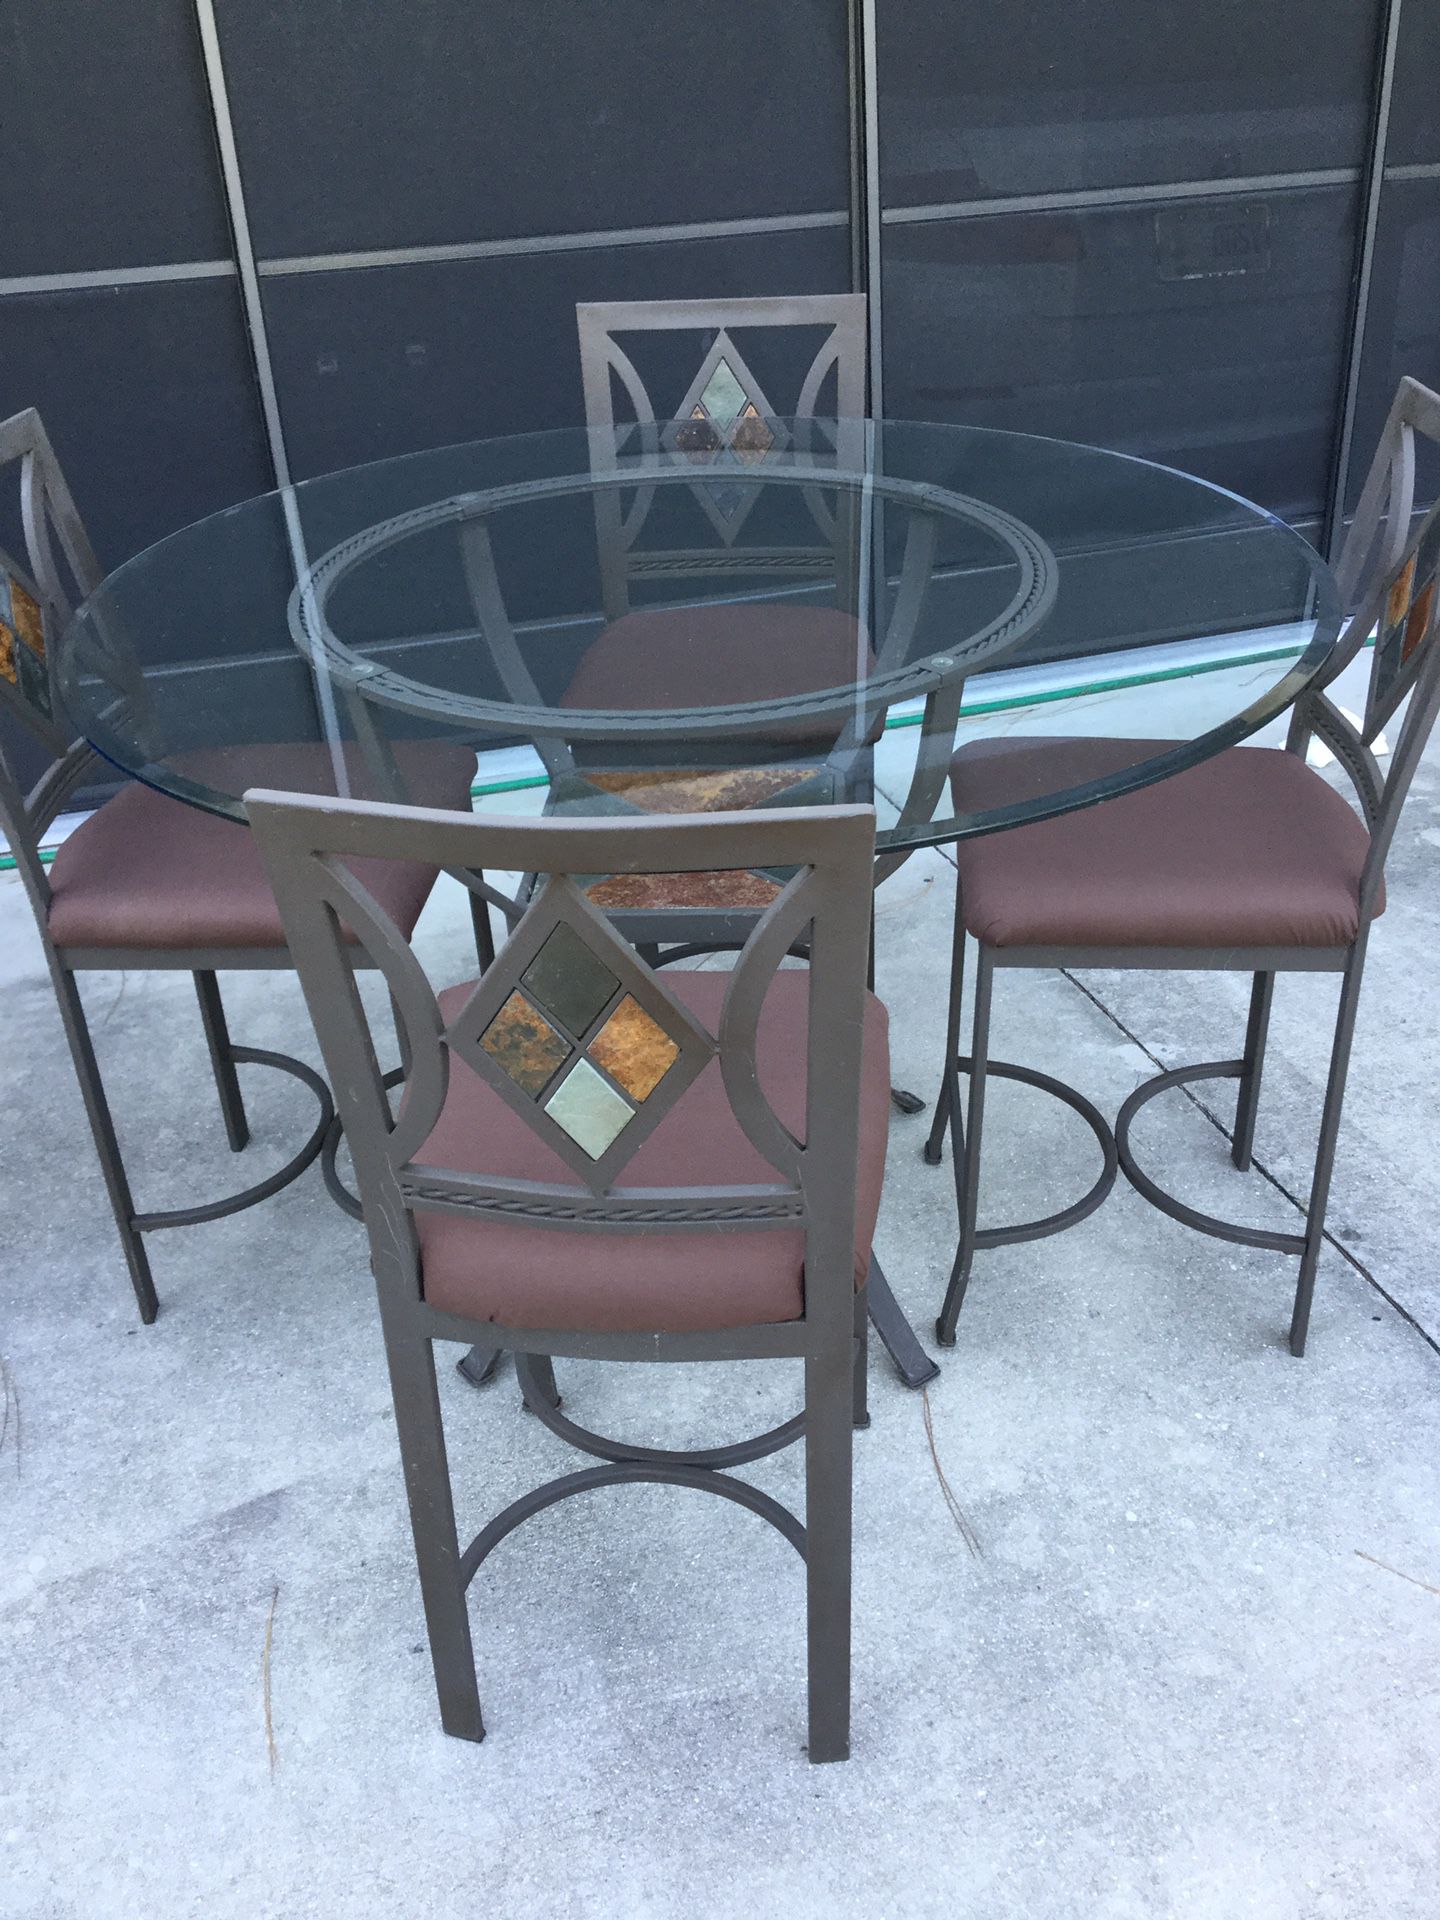 Dinette set with 4 chairs